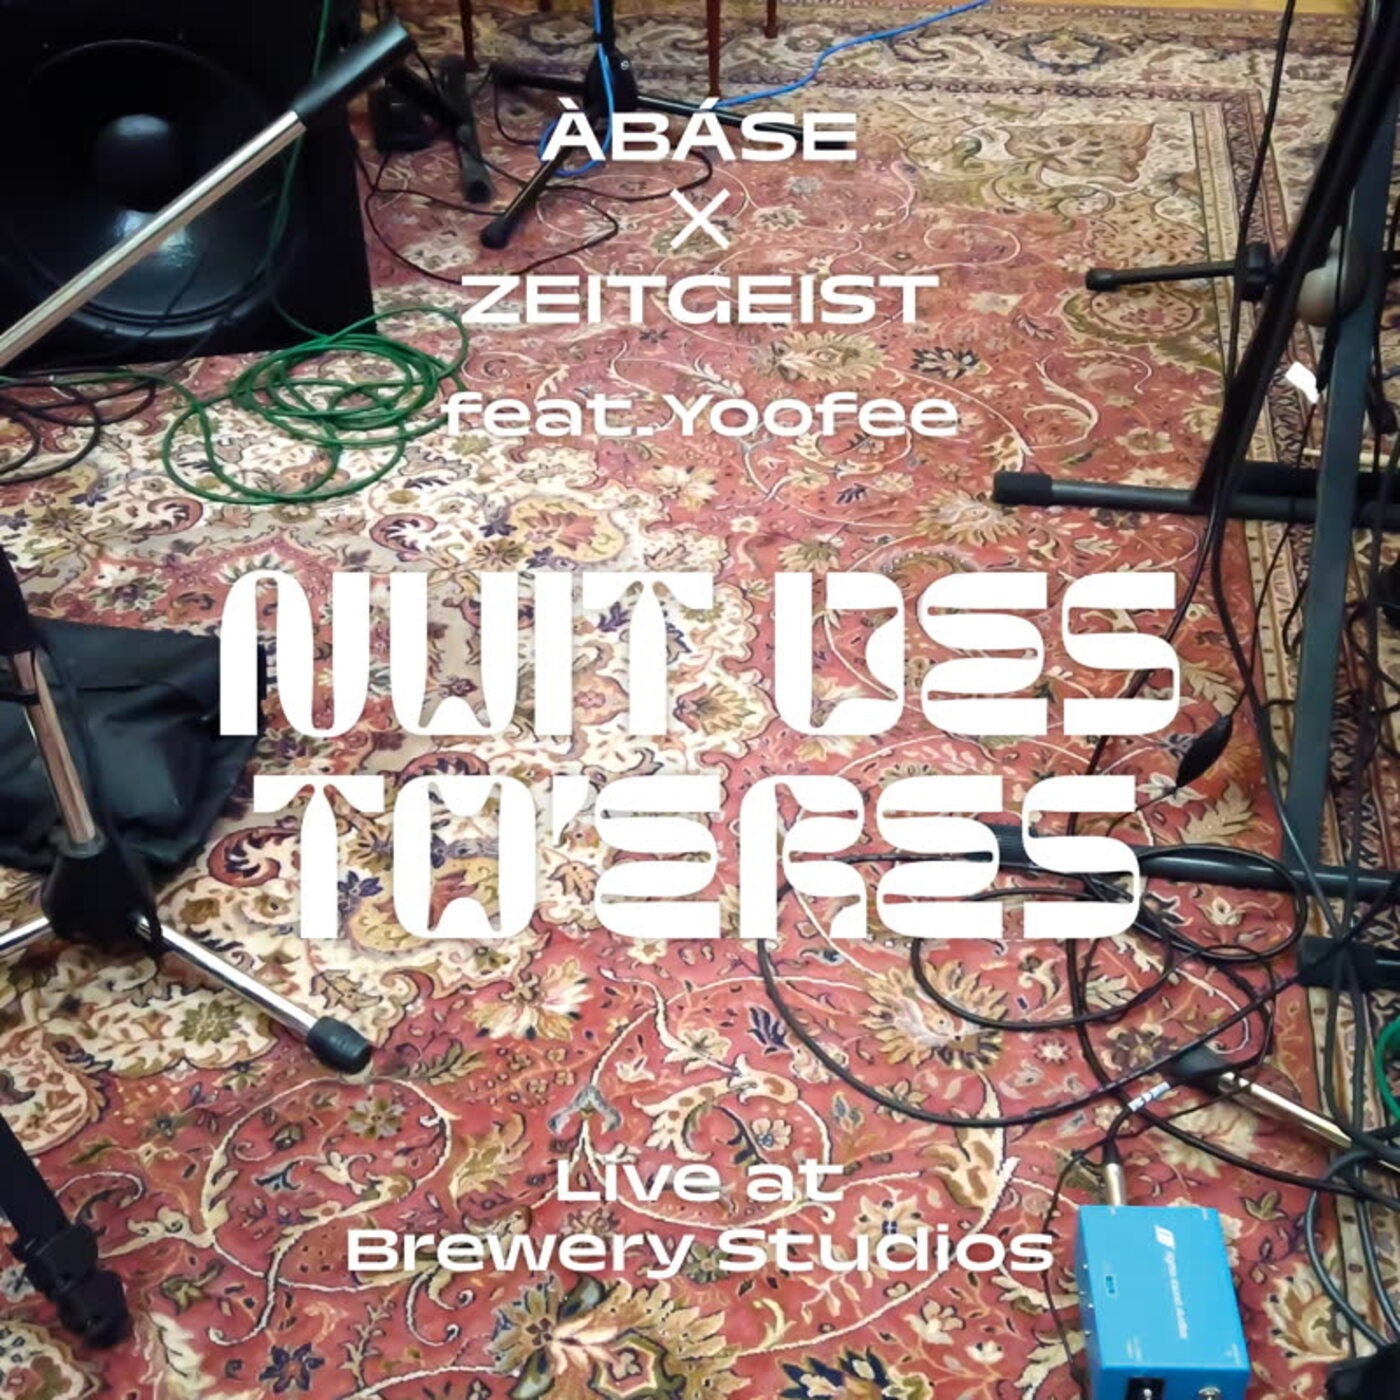 Nuit des To'eres (Live at Brewery Studios) [feat. Yoofee]